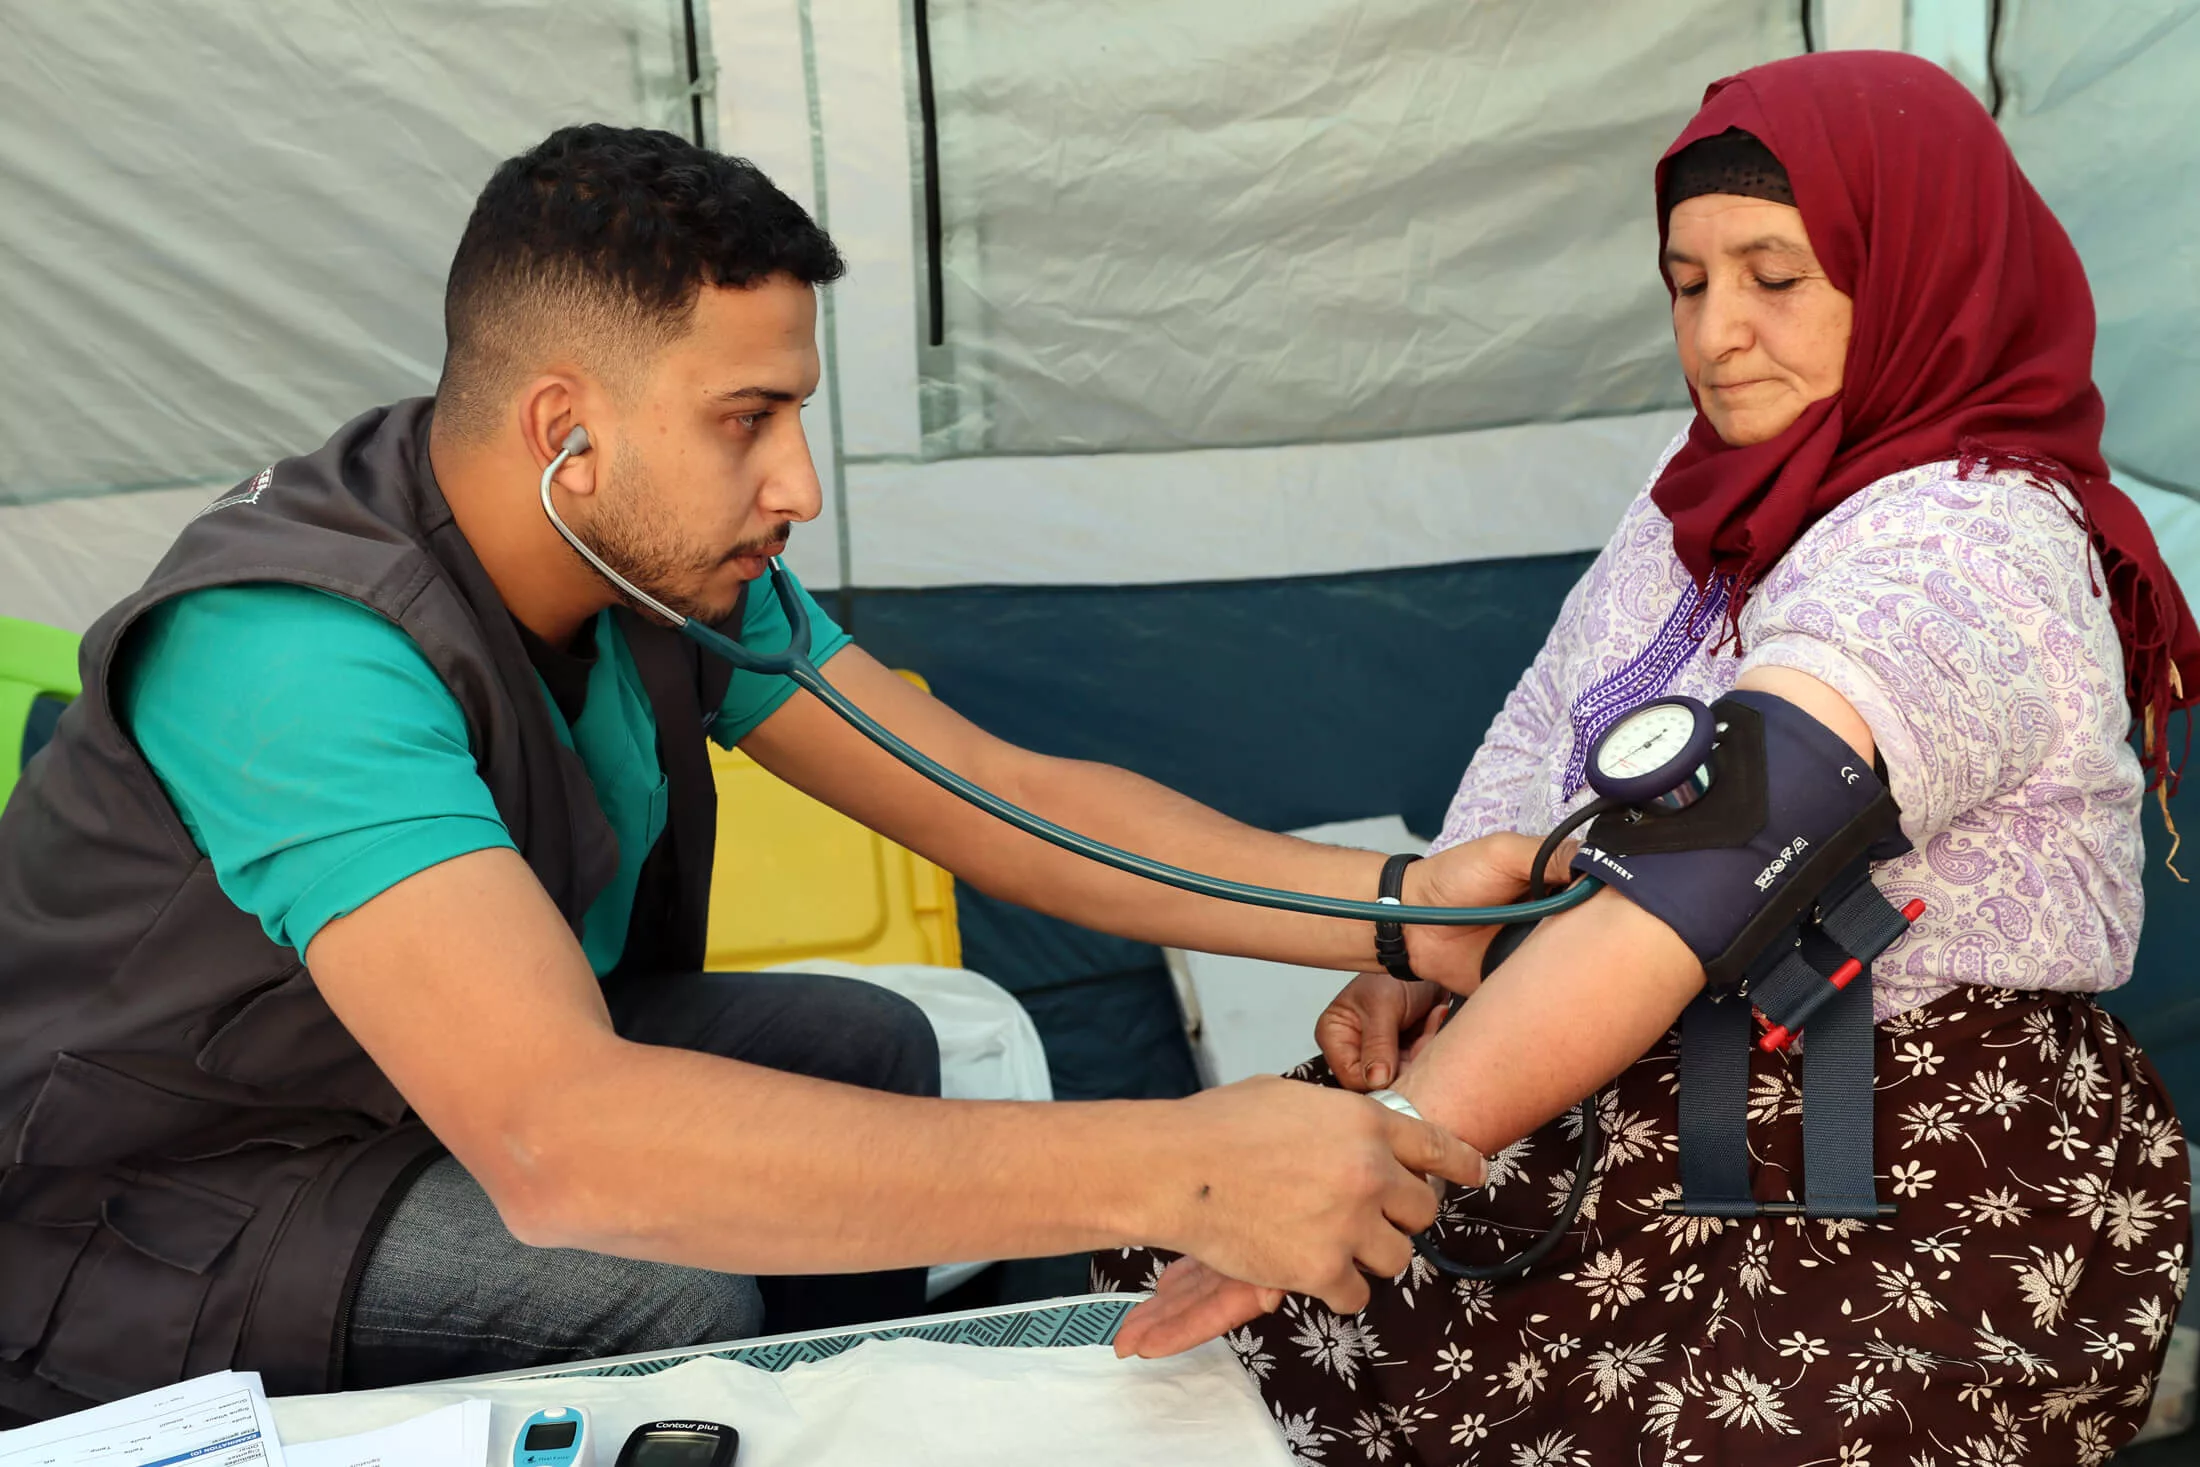 Staff members provide health consultations and routine blood pressure checks on people affected by the Morocco earthquake.